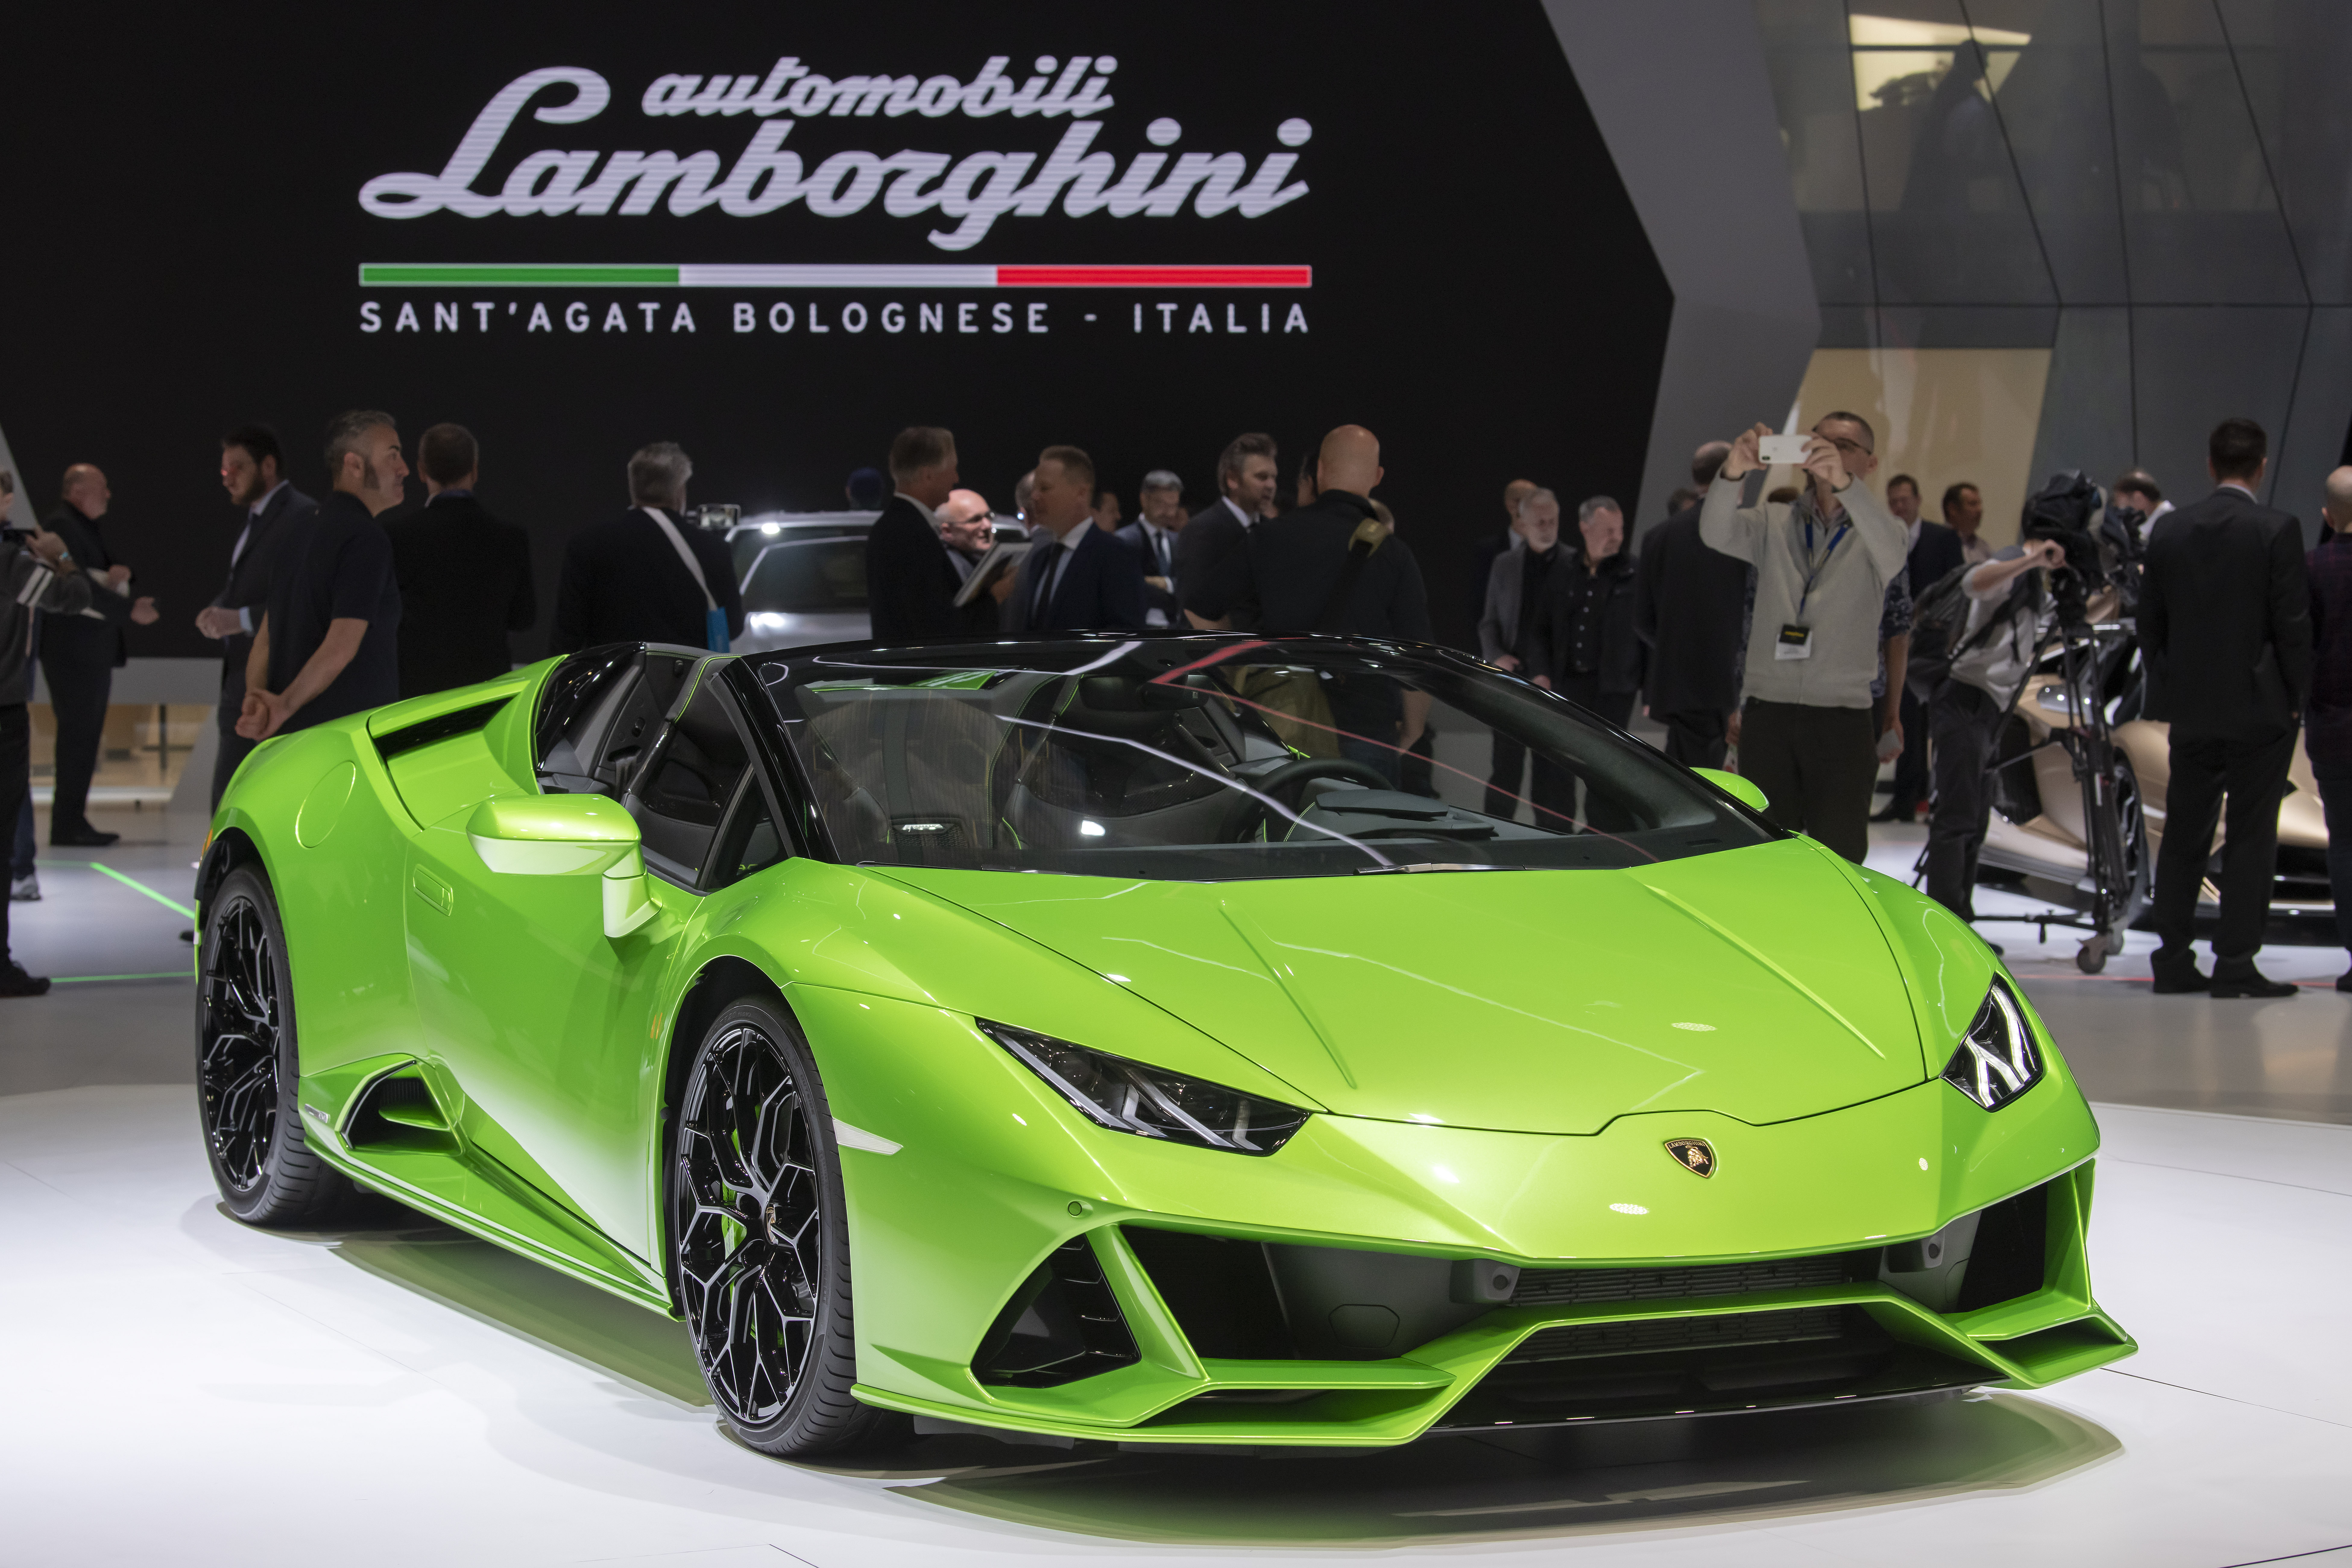 Looking is free: High-end rides abundant at Geneva auto show